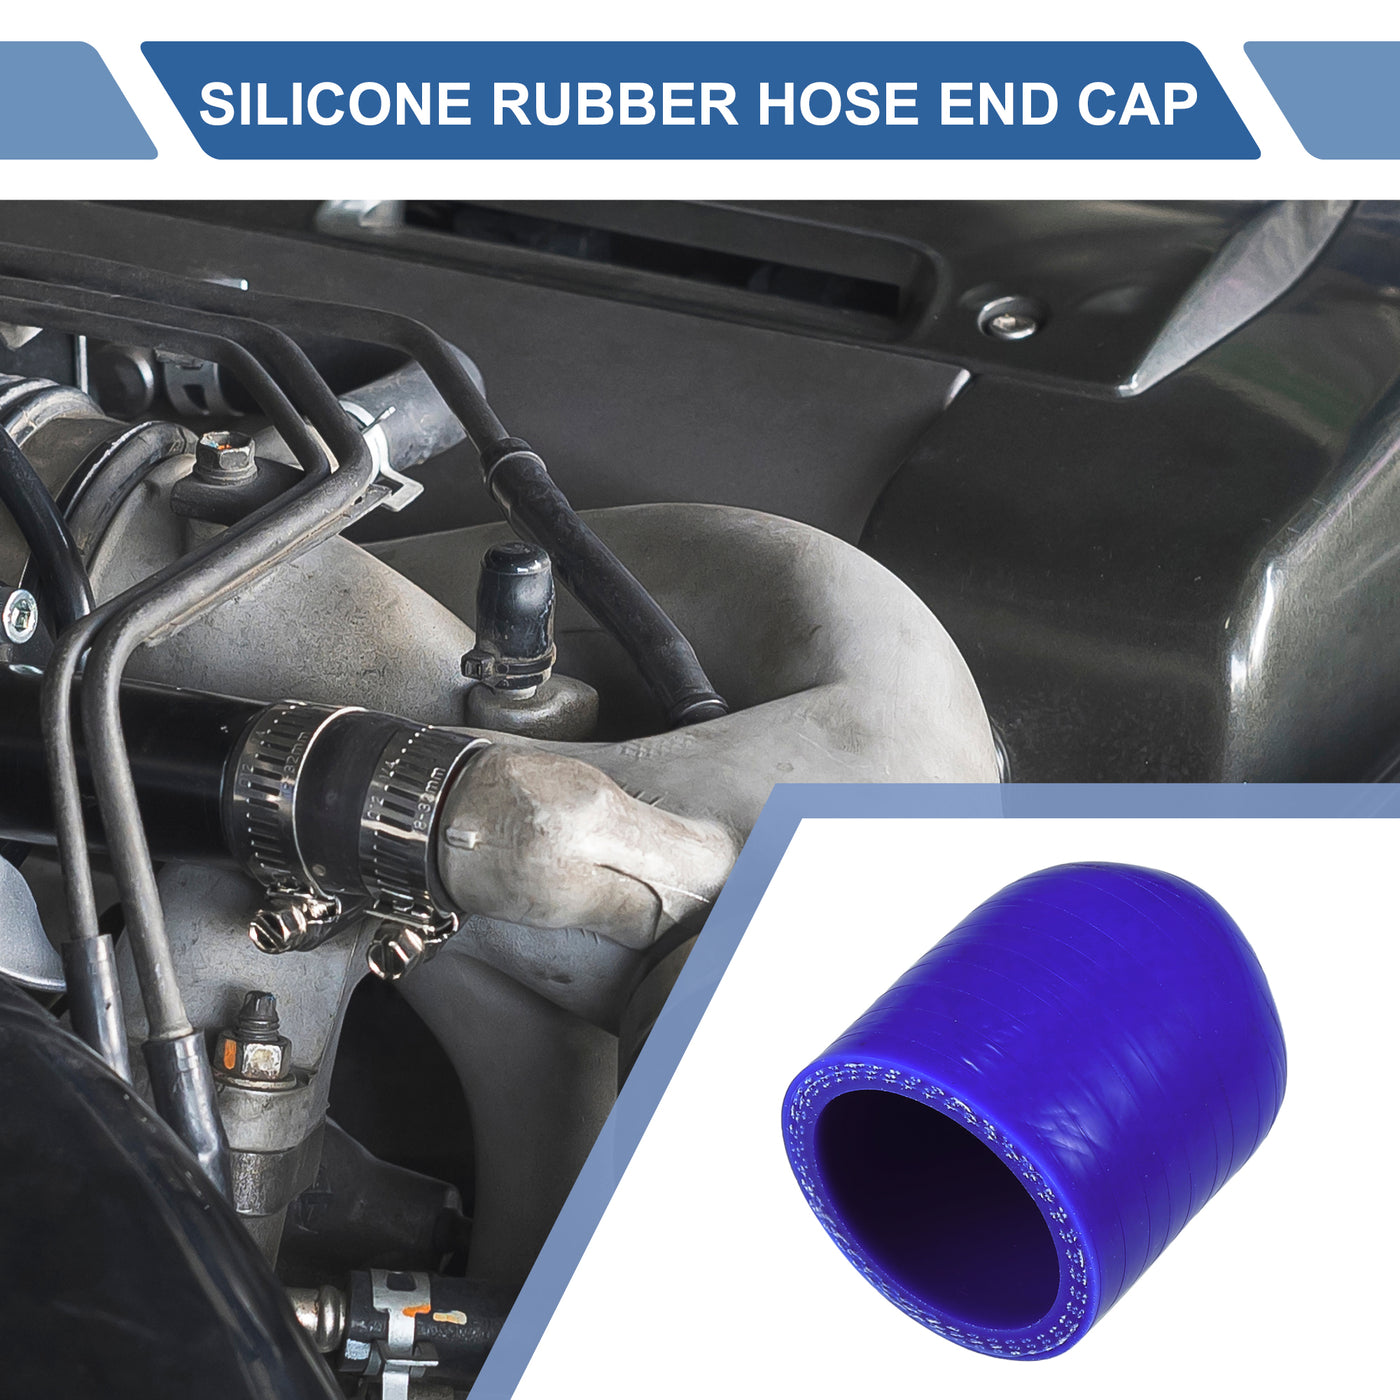 X AUTOHAUX 1 Pcs 30mm Length 30mm/1.18" ID Blue Car Silicone Rubber Hose End Cap Silicone Reinforced Blanking Cap for Bypass Tube Universal